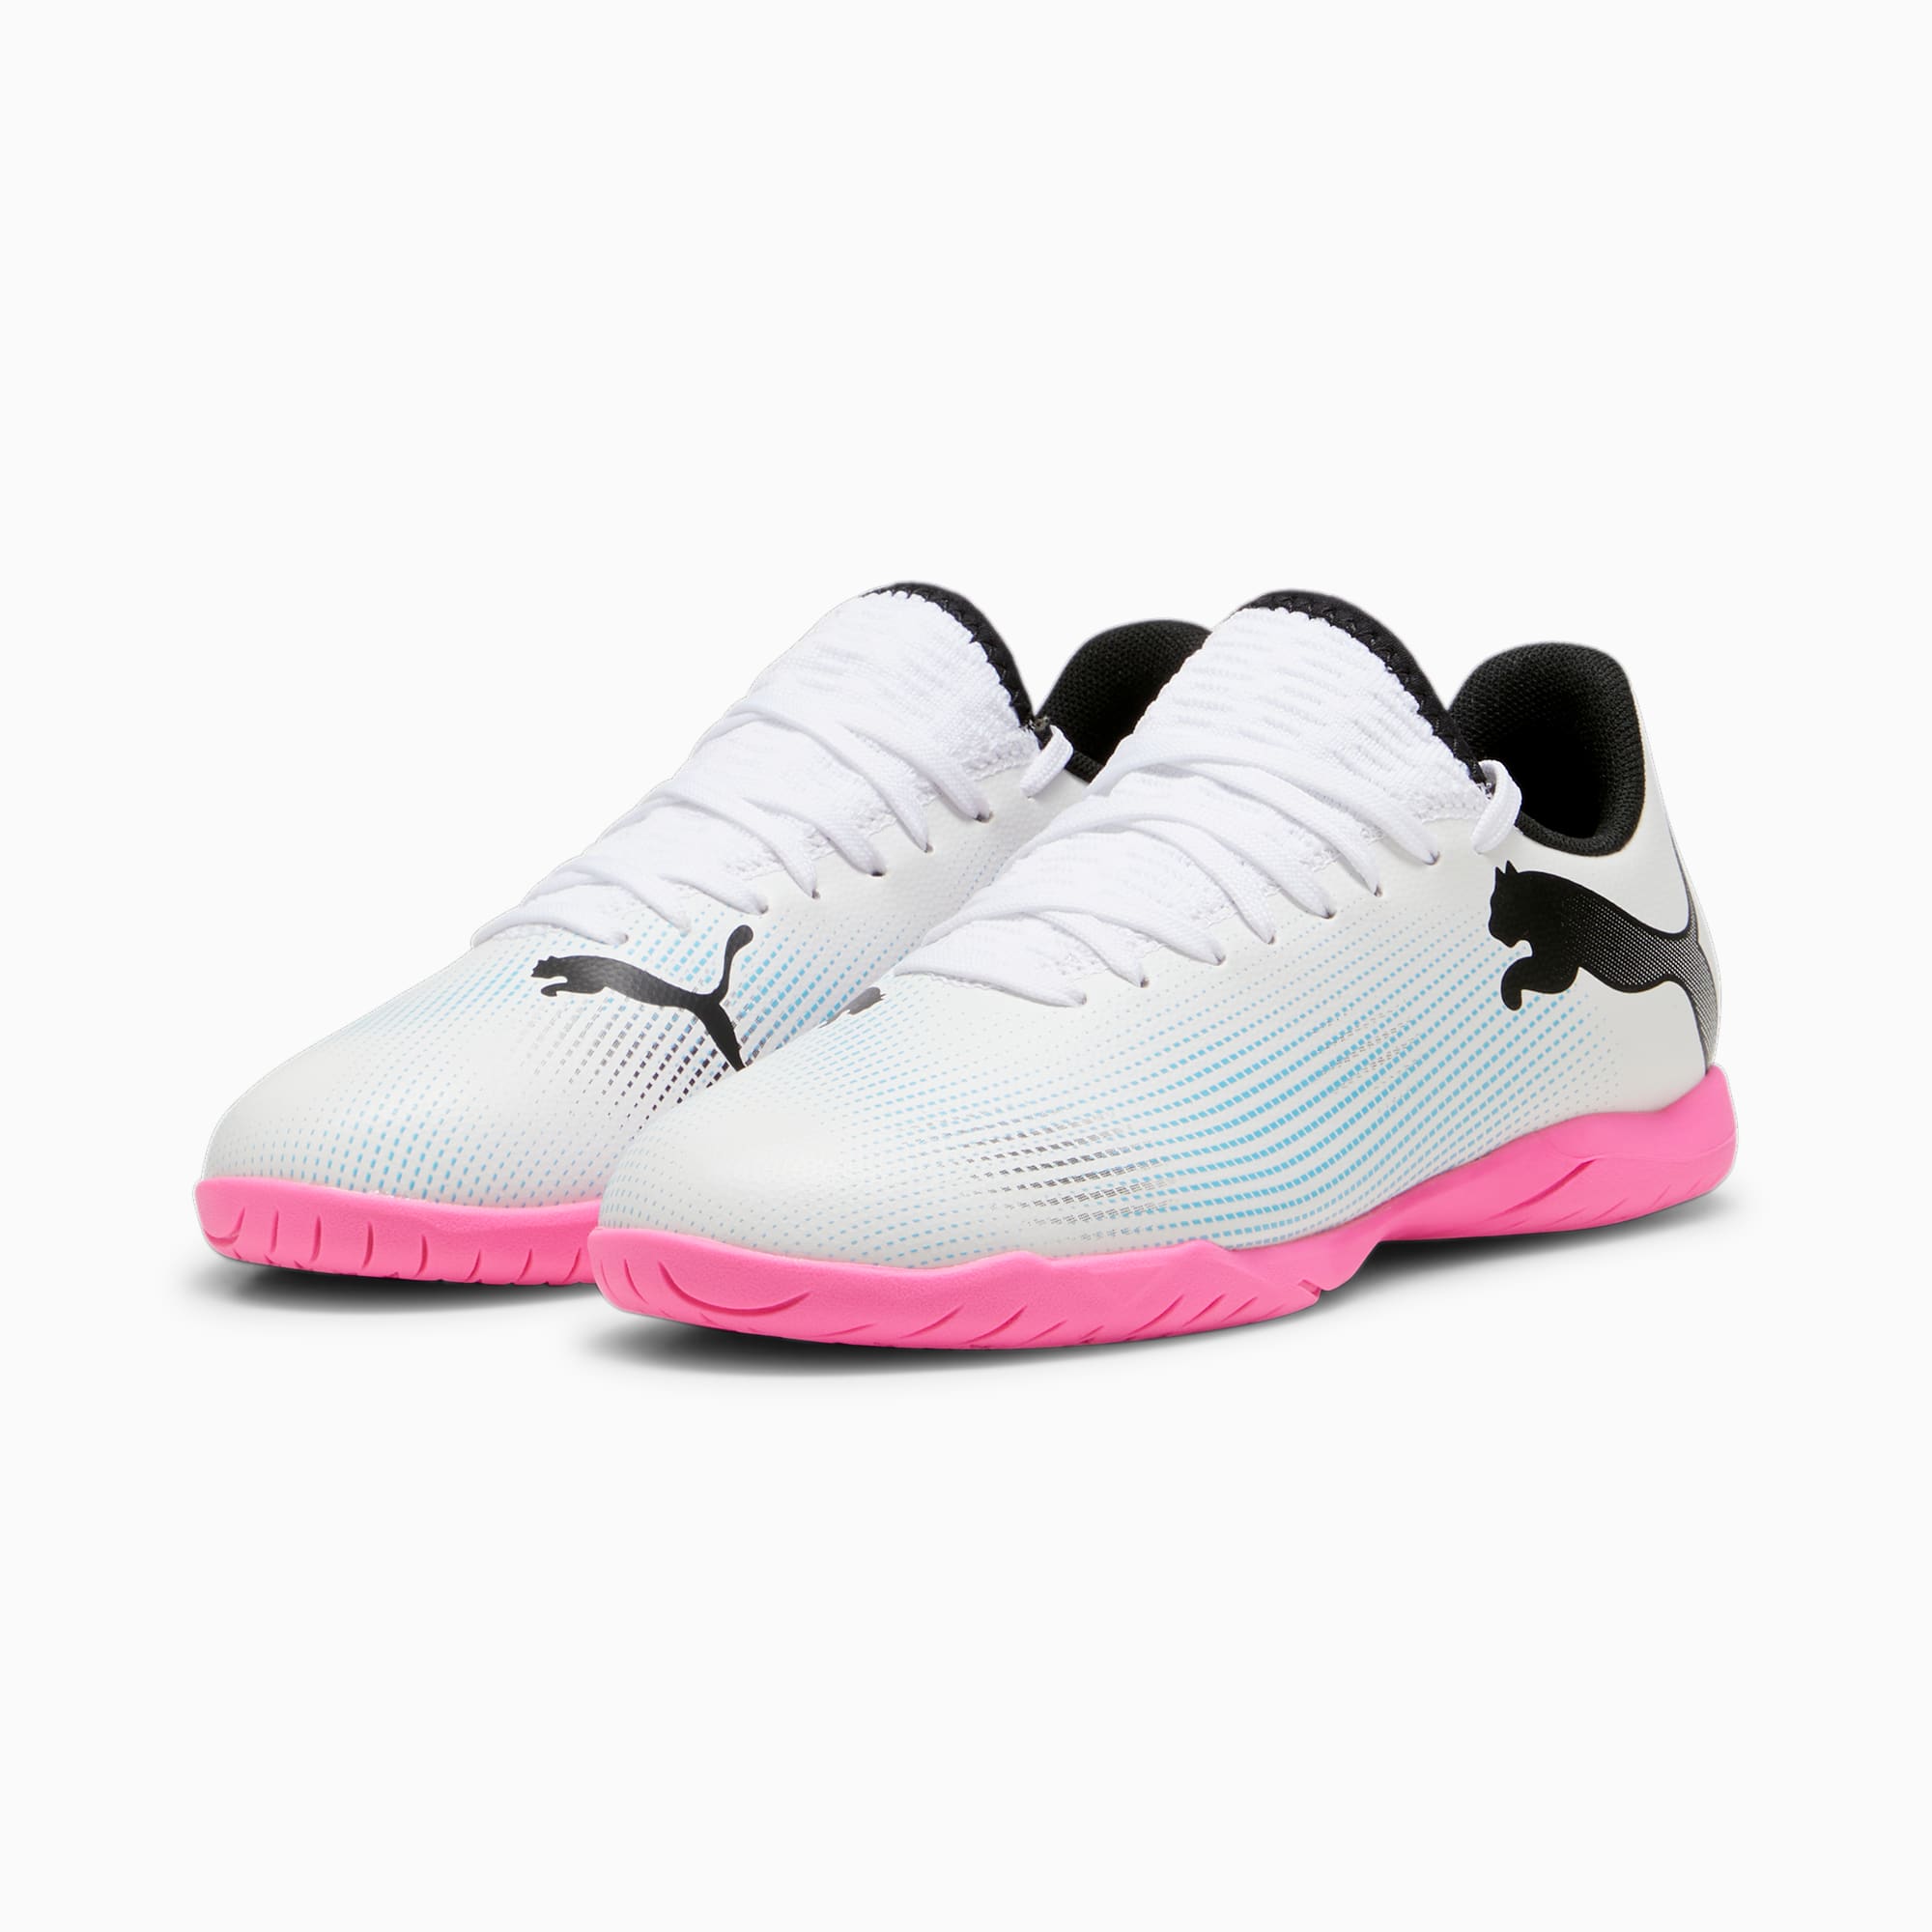 PUMA Future 7 Play IT Youth Football Boots, White/Black/Poison Pink